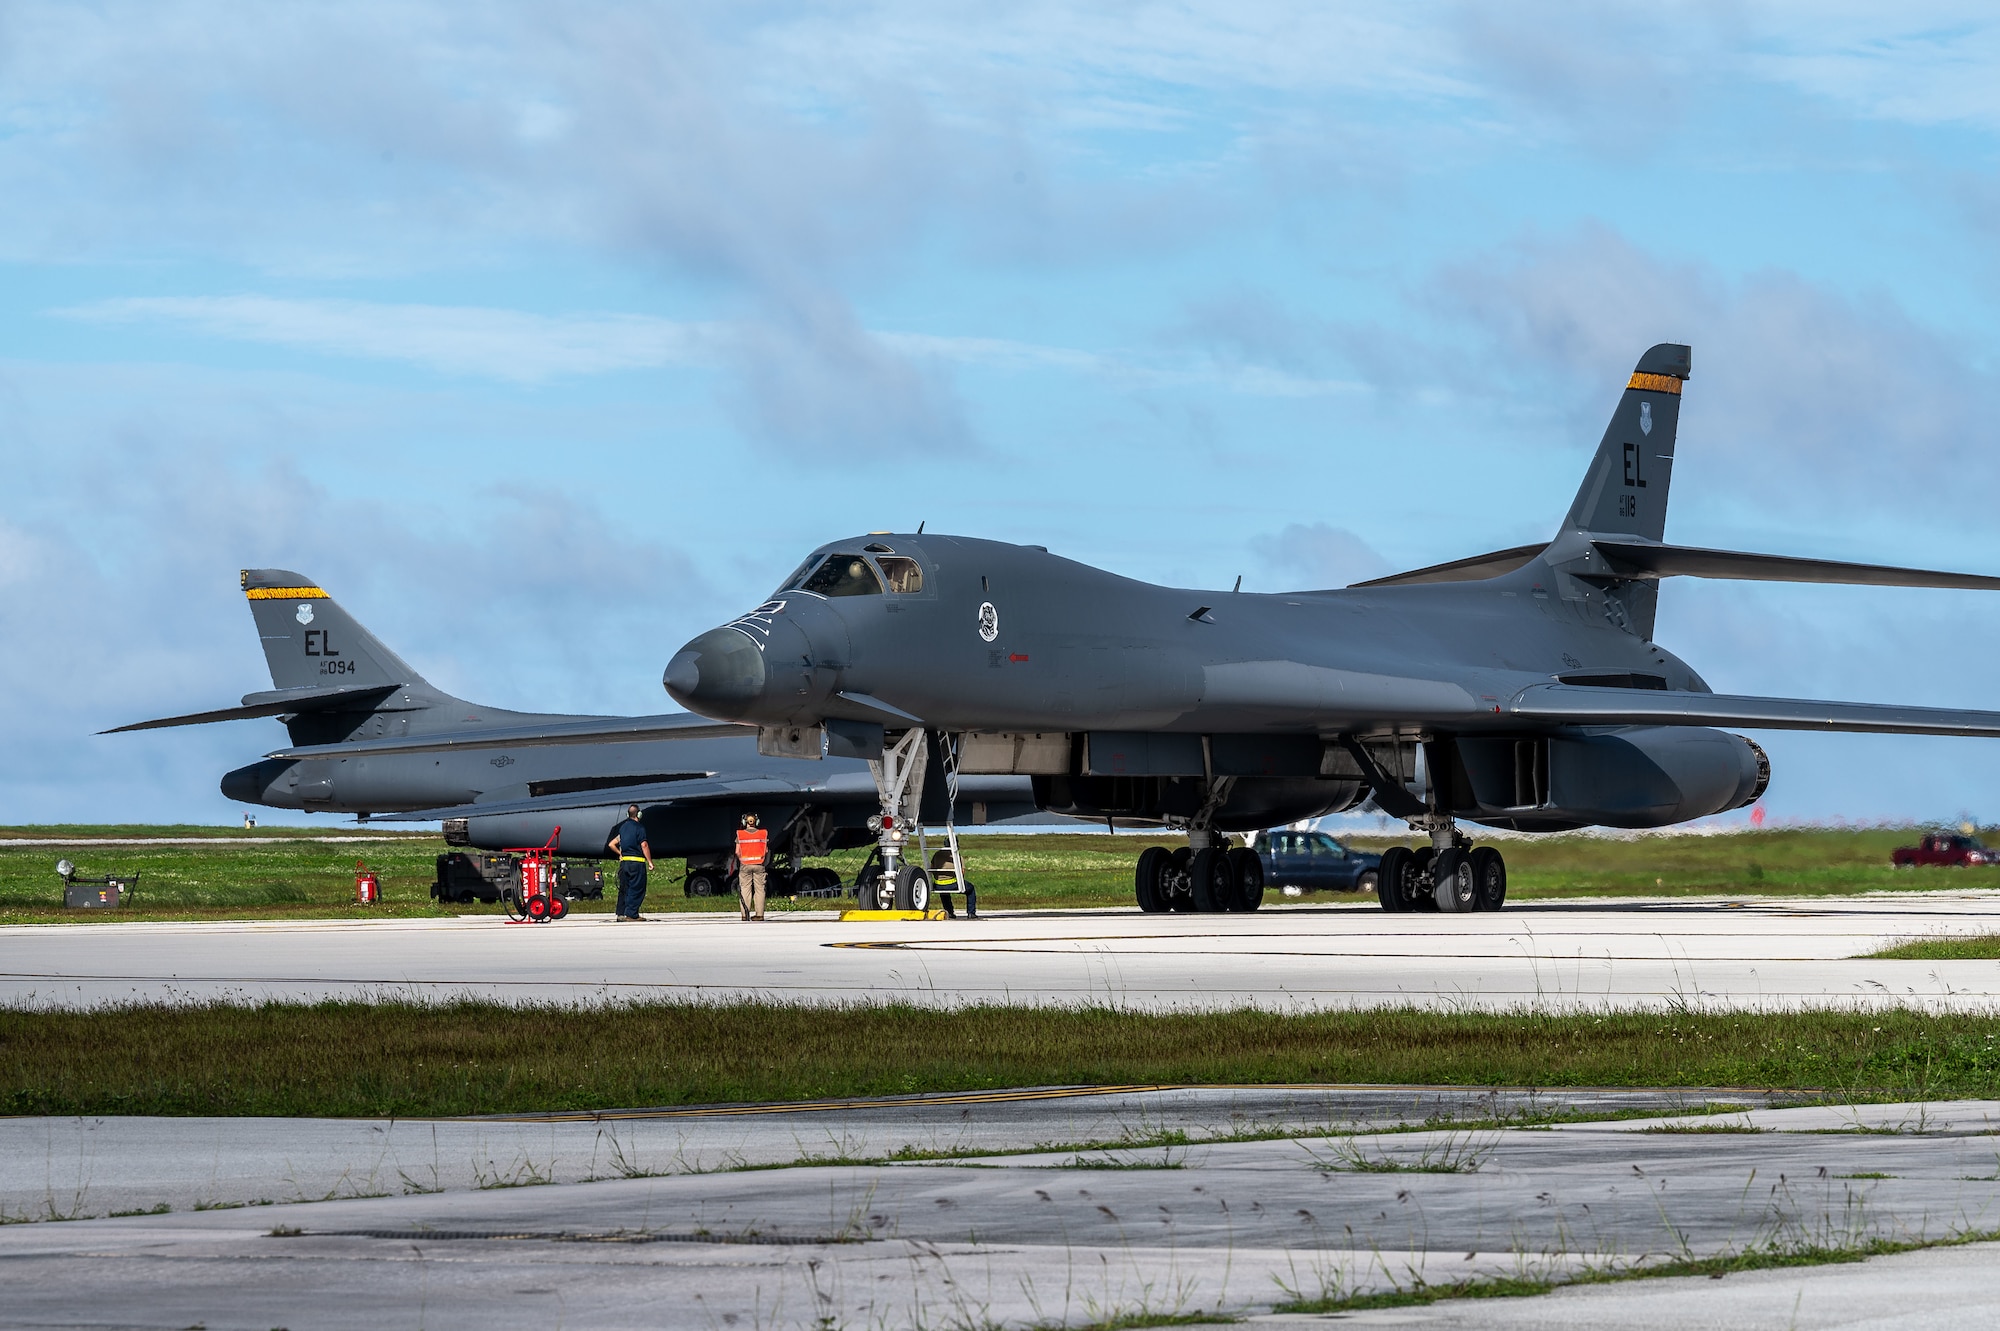 A U.S. Air Force B-1B Lancer from Ellsworth Air Force Base, S.D., receives an immediate post-flight inspection after landing at Andersen Air Force Base, Guam, for a Bomber Task Force mission, Dec. 10, 2020. The B-1B Lancer is capable of delivering massive quantities of precision and non-precision munitions against any adversary, anywhere in the world at any time. (U.S. Air Force photo by Senior Airman Tristan Day)